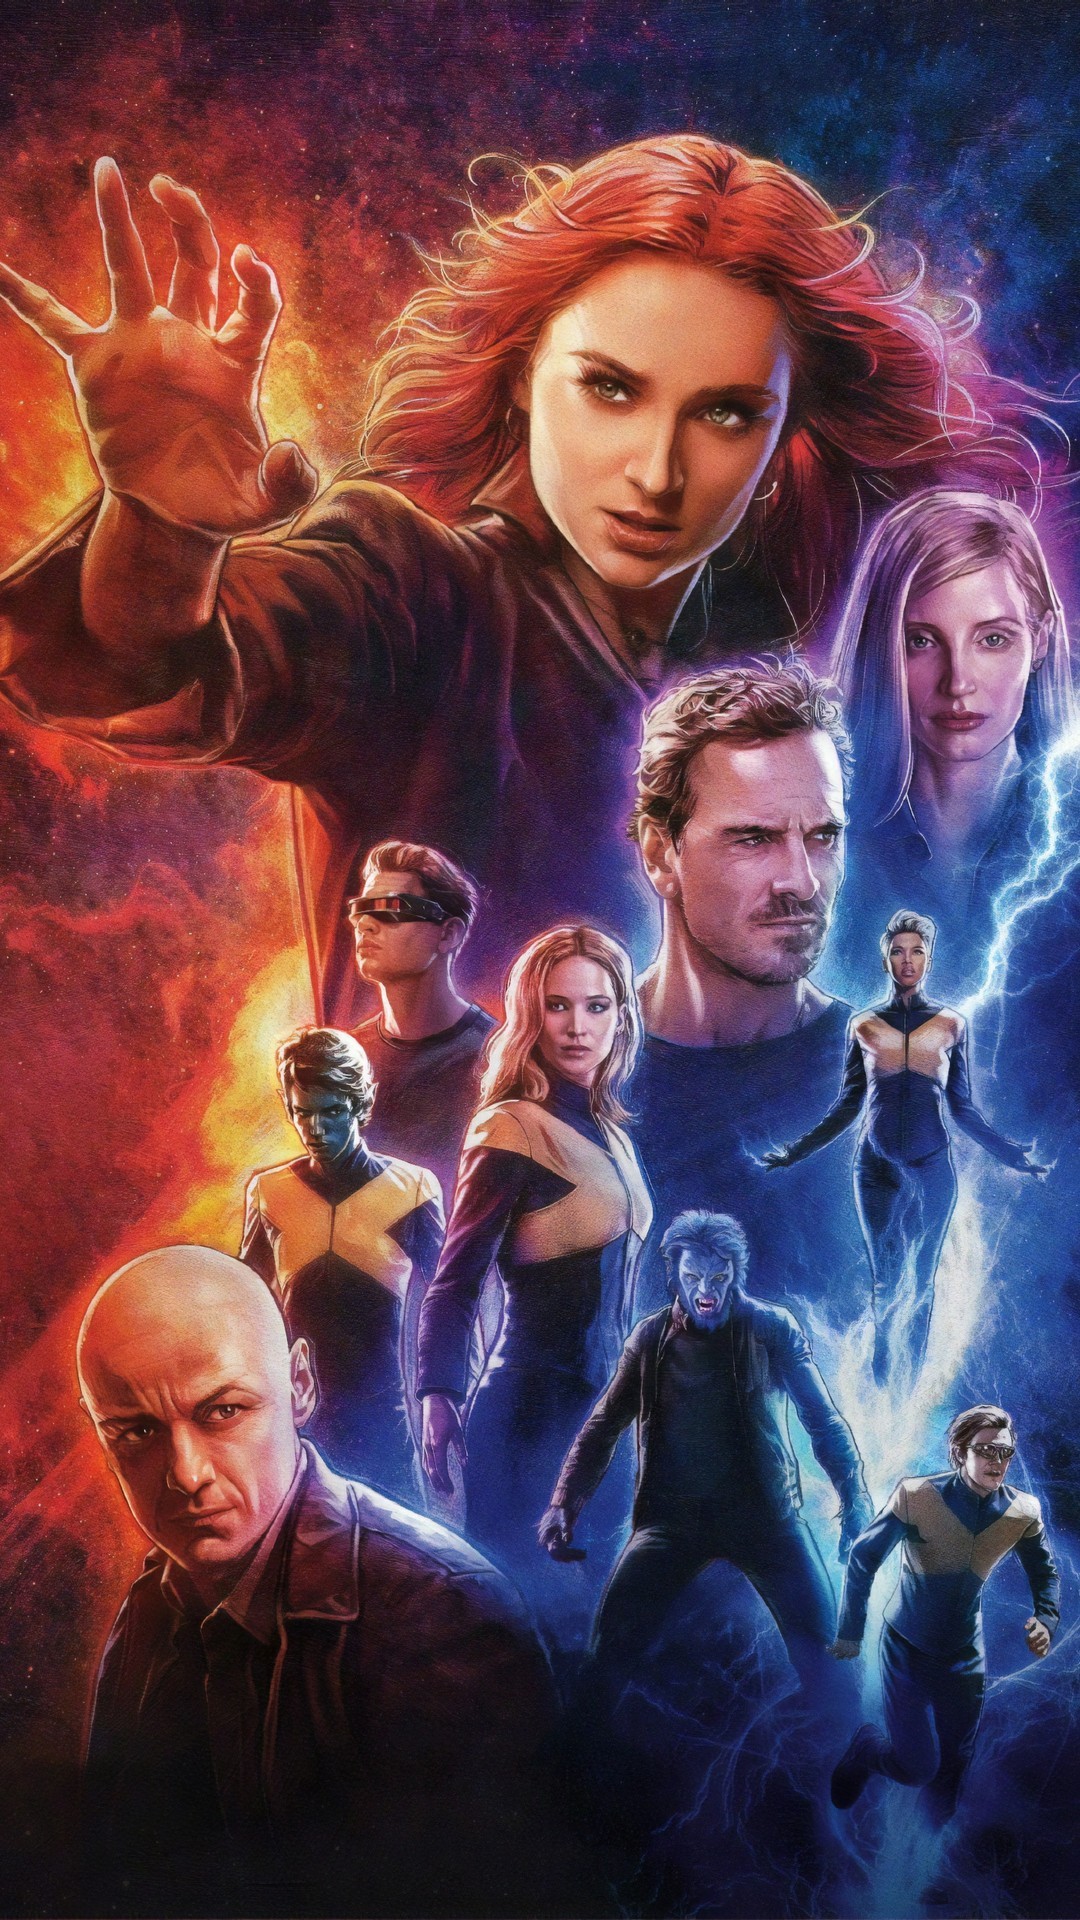 Dark Phoenix 2019 Wallpaper for iPhone with high-resolution 1080x1920 pixel. You can use this wallpaper for your iPhone 5, 6, 7, 8, X, XS, XR backgrounds, Mobile Screensaver, or iPad Lock Screen